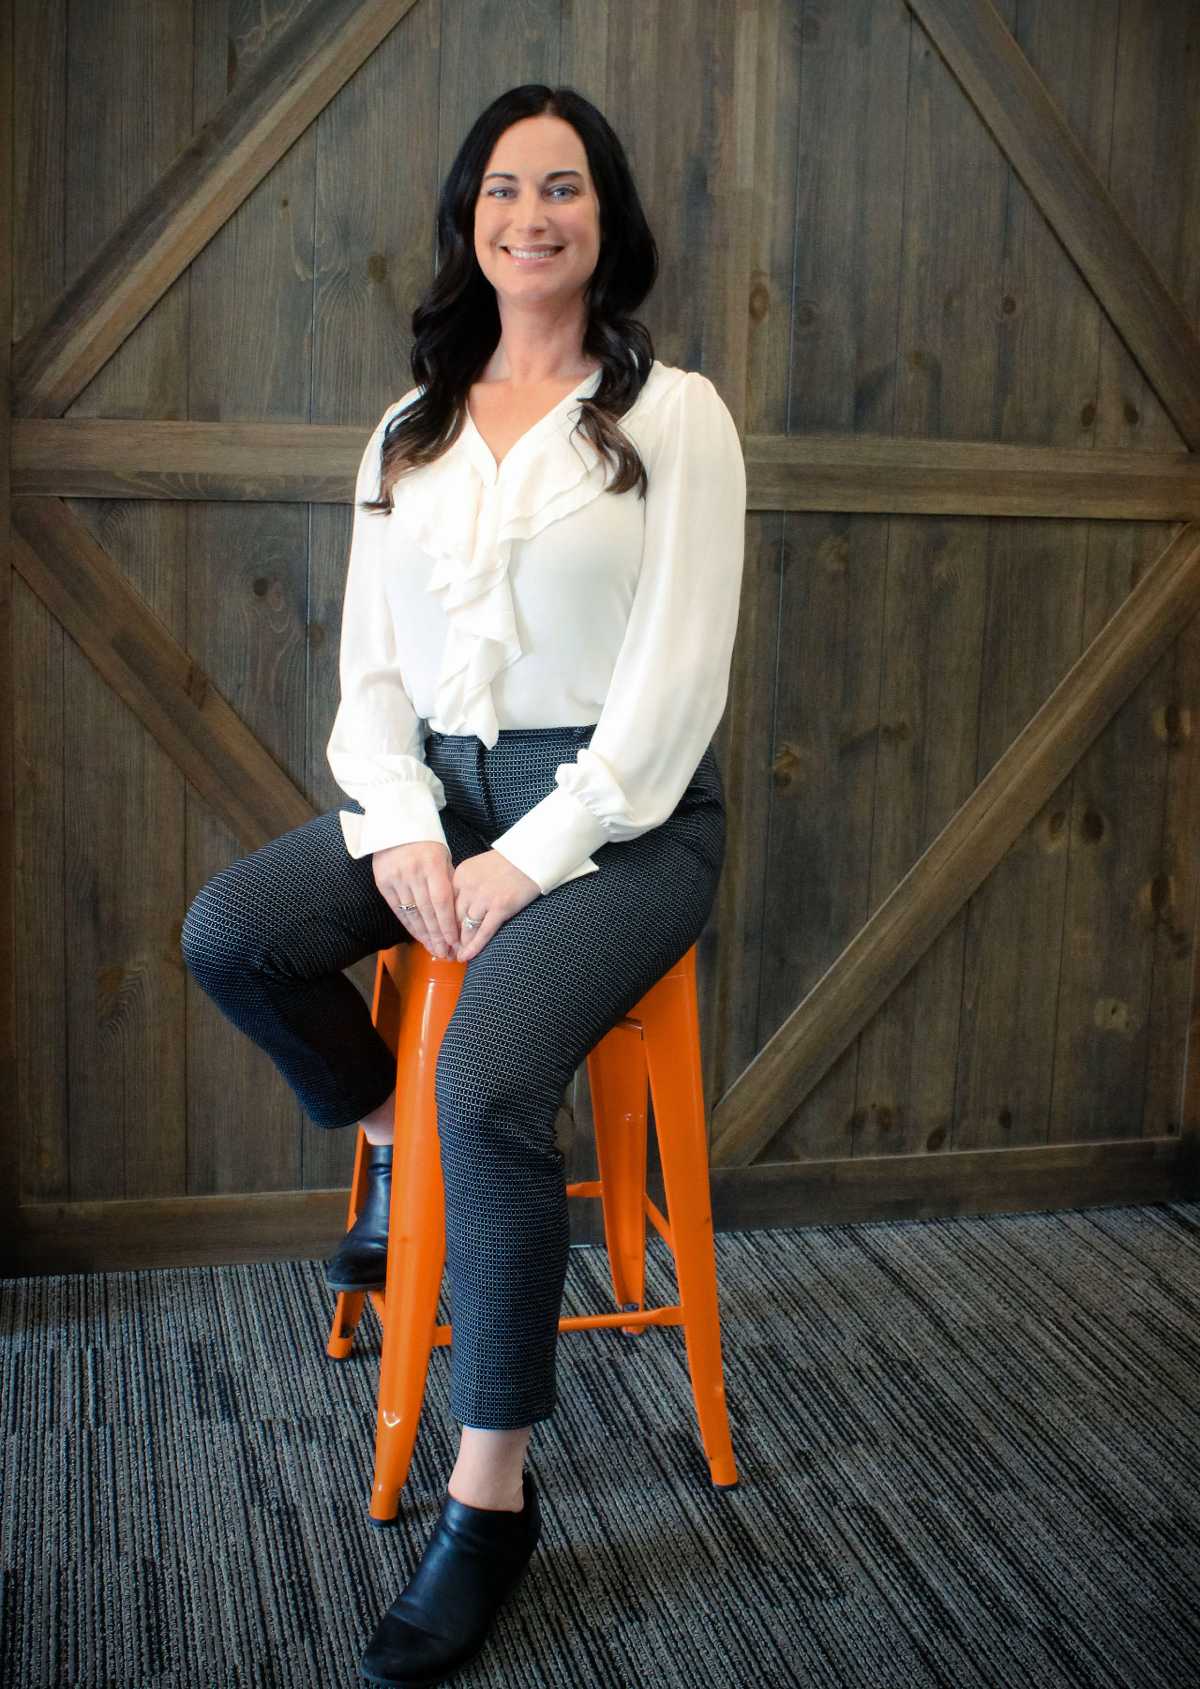 A woman in a white short and blue jeans sitting on an orange stool in front of a wooden wall